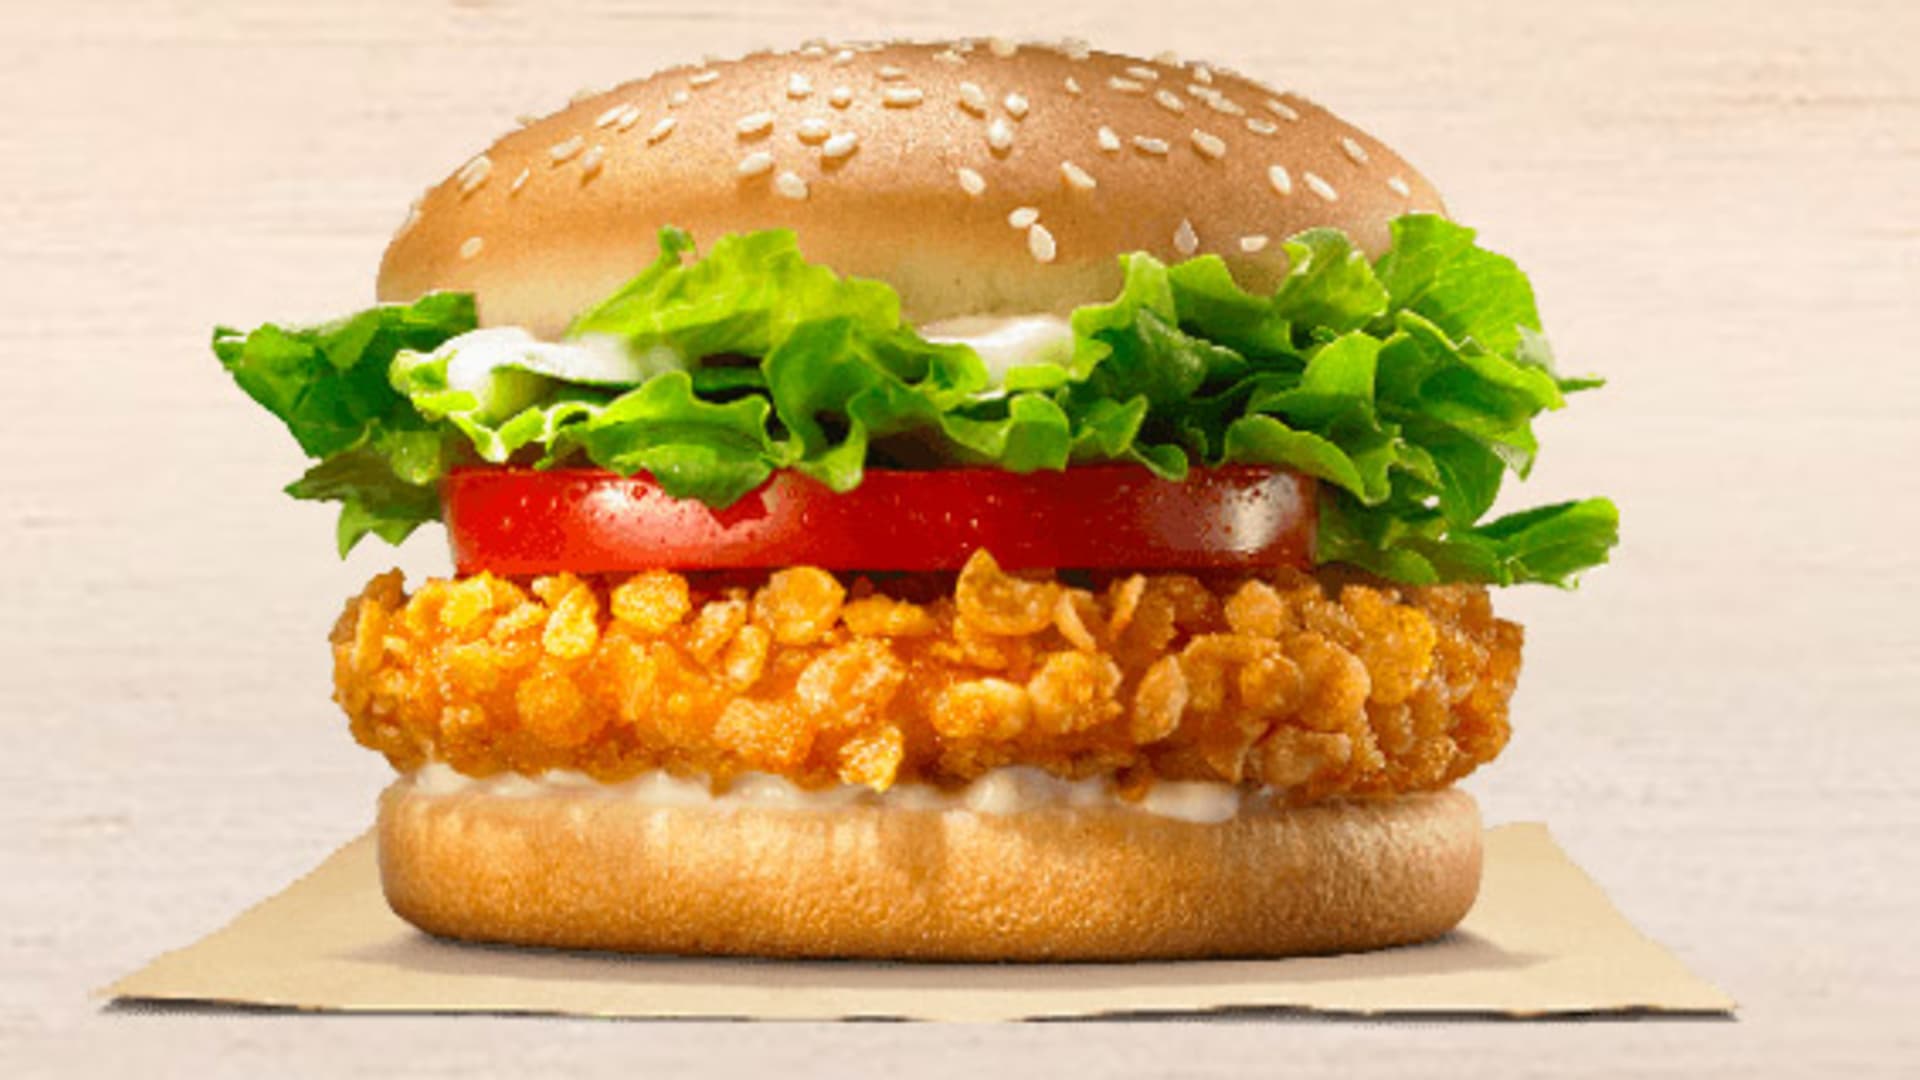 Burger King's chicken sandwich gets a makeover to win over the haters